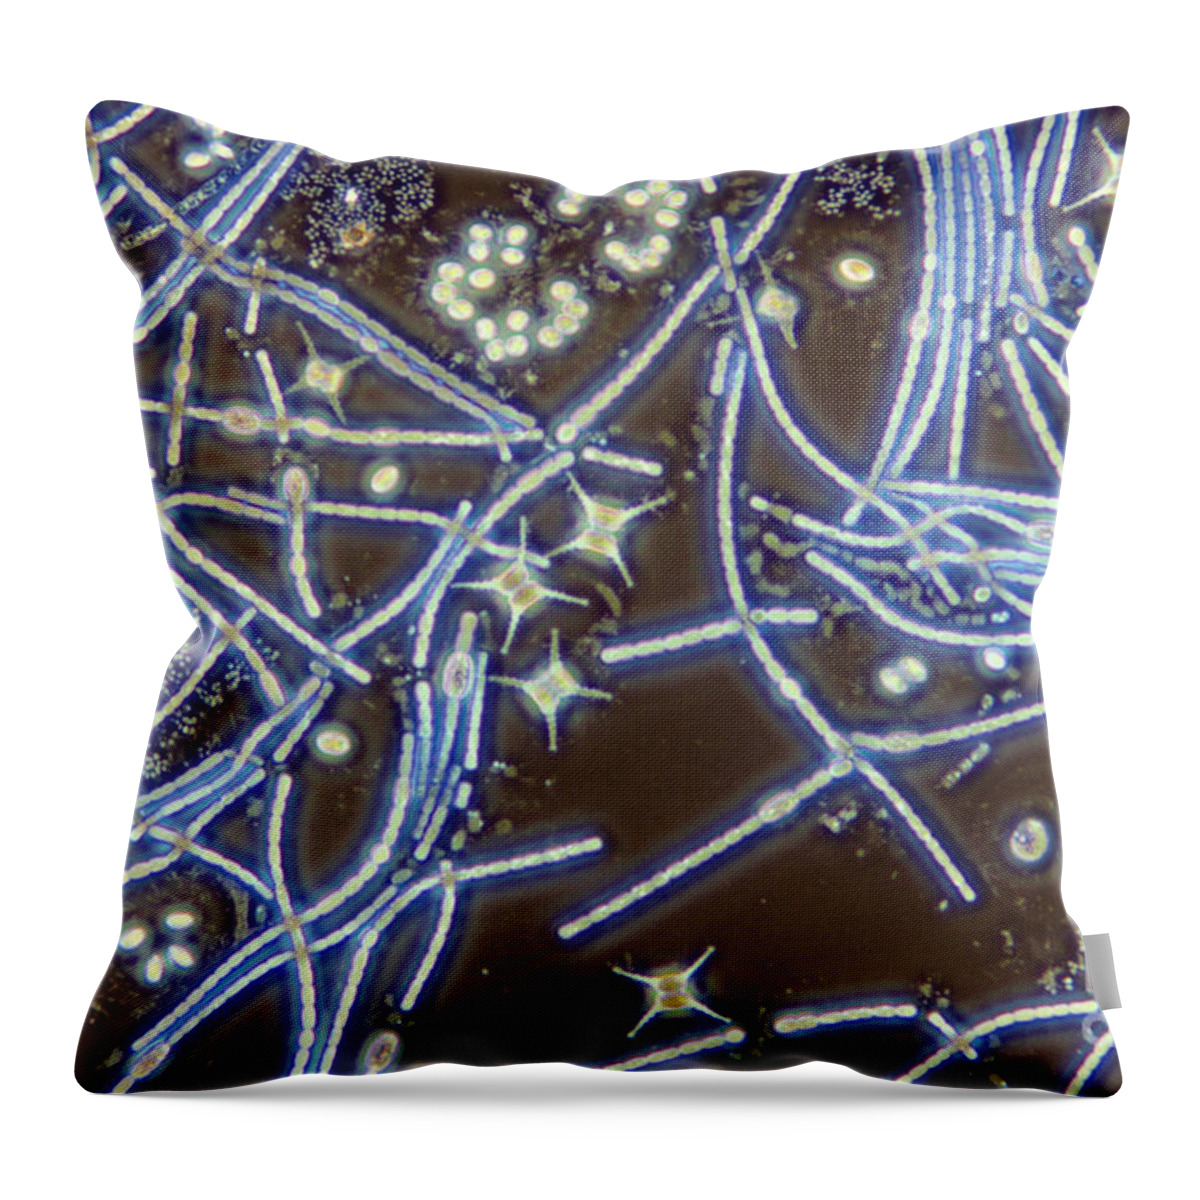 Anoptral Contrast Microscope Throw Pillow featuring the photograph Anabaena Staurastrum Anoptral Contrast by M I Walker